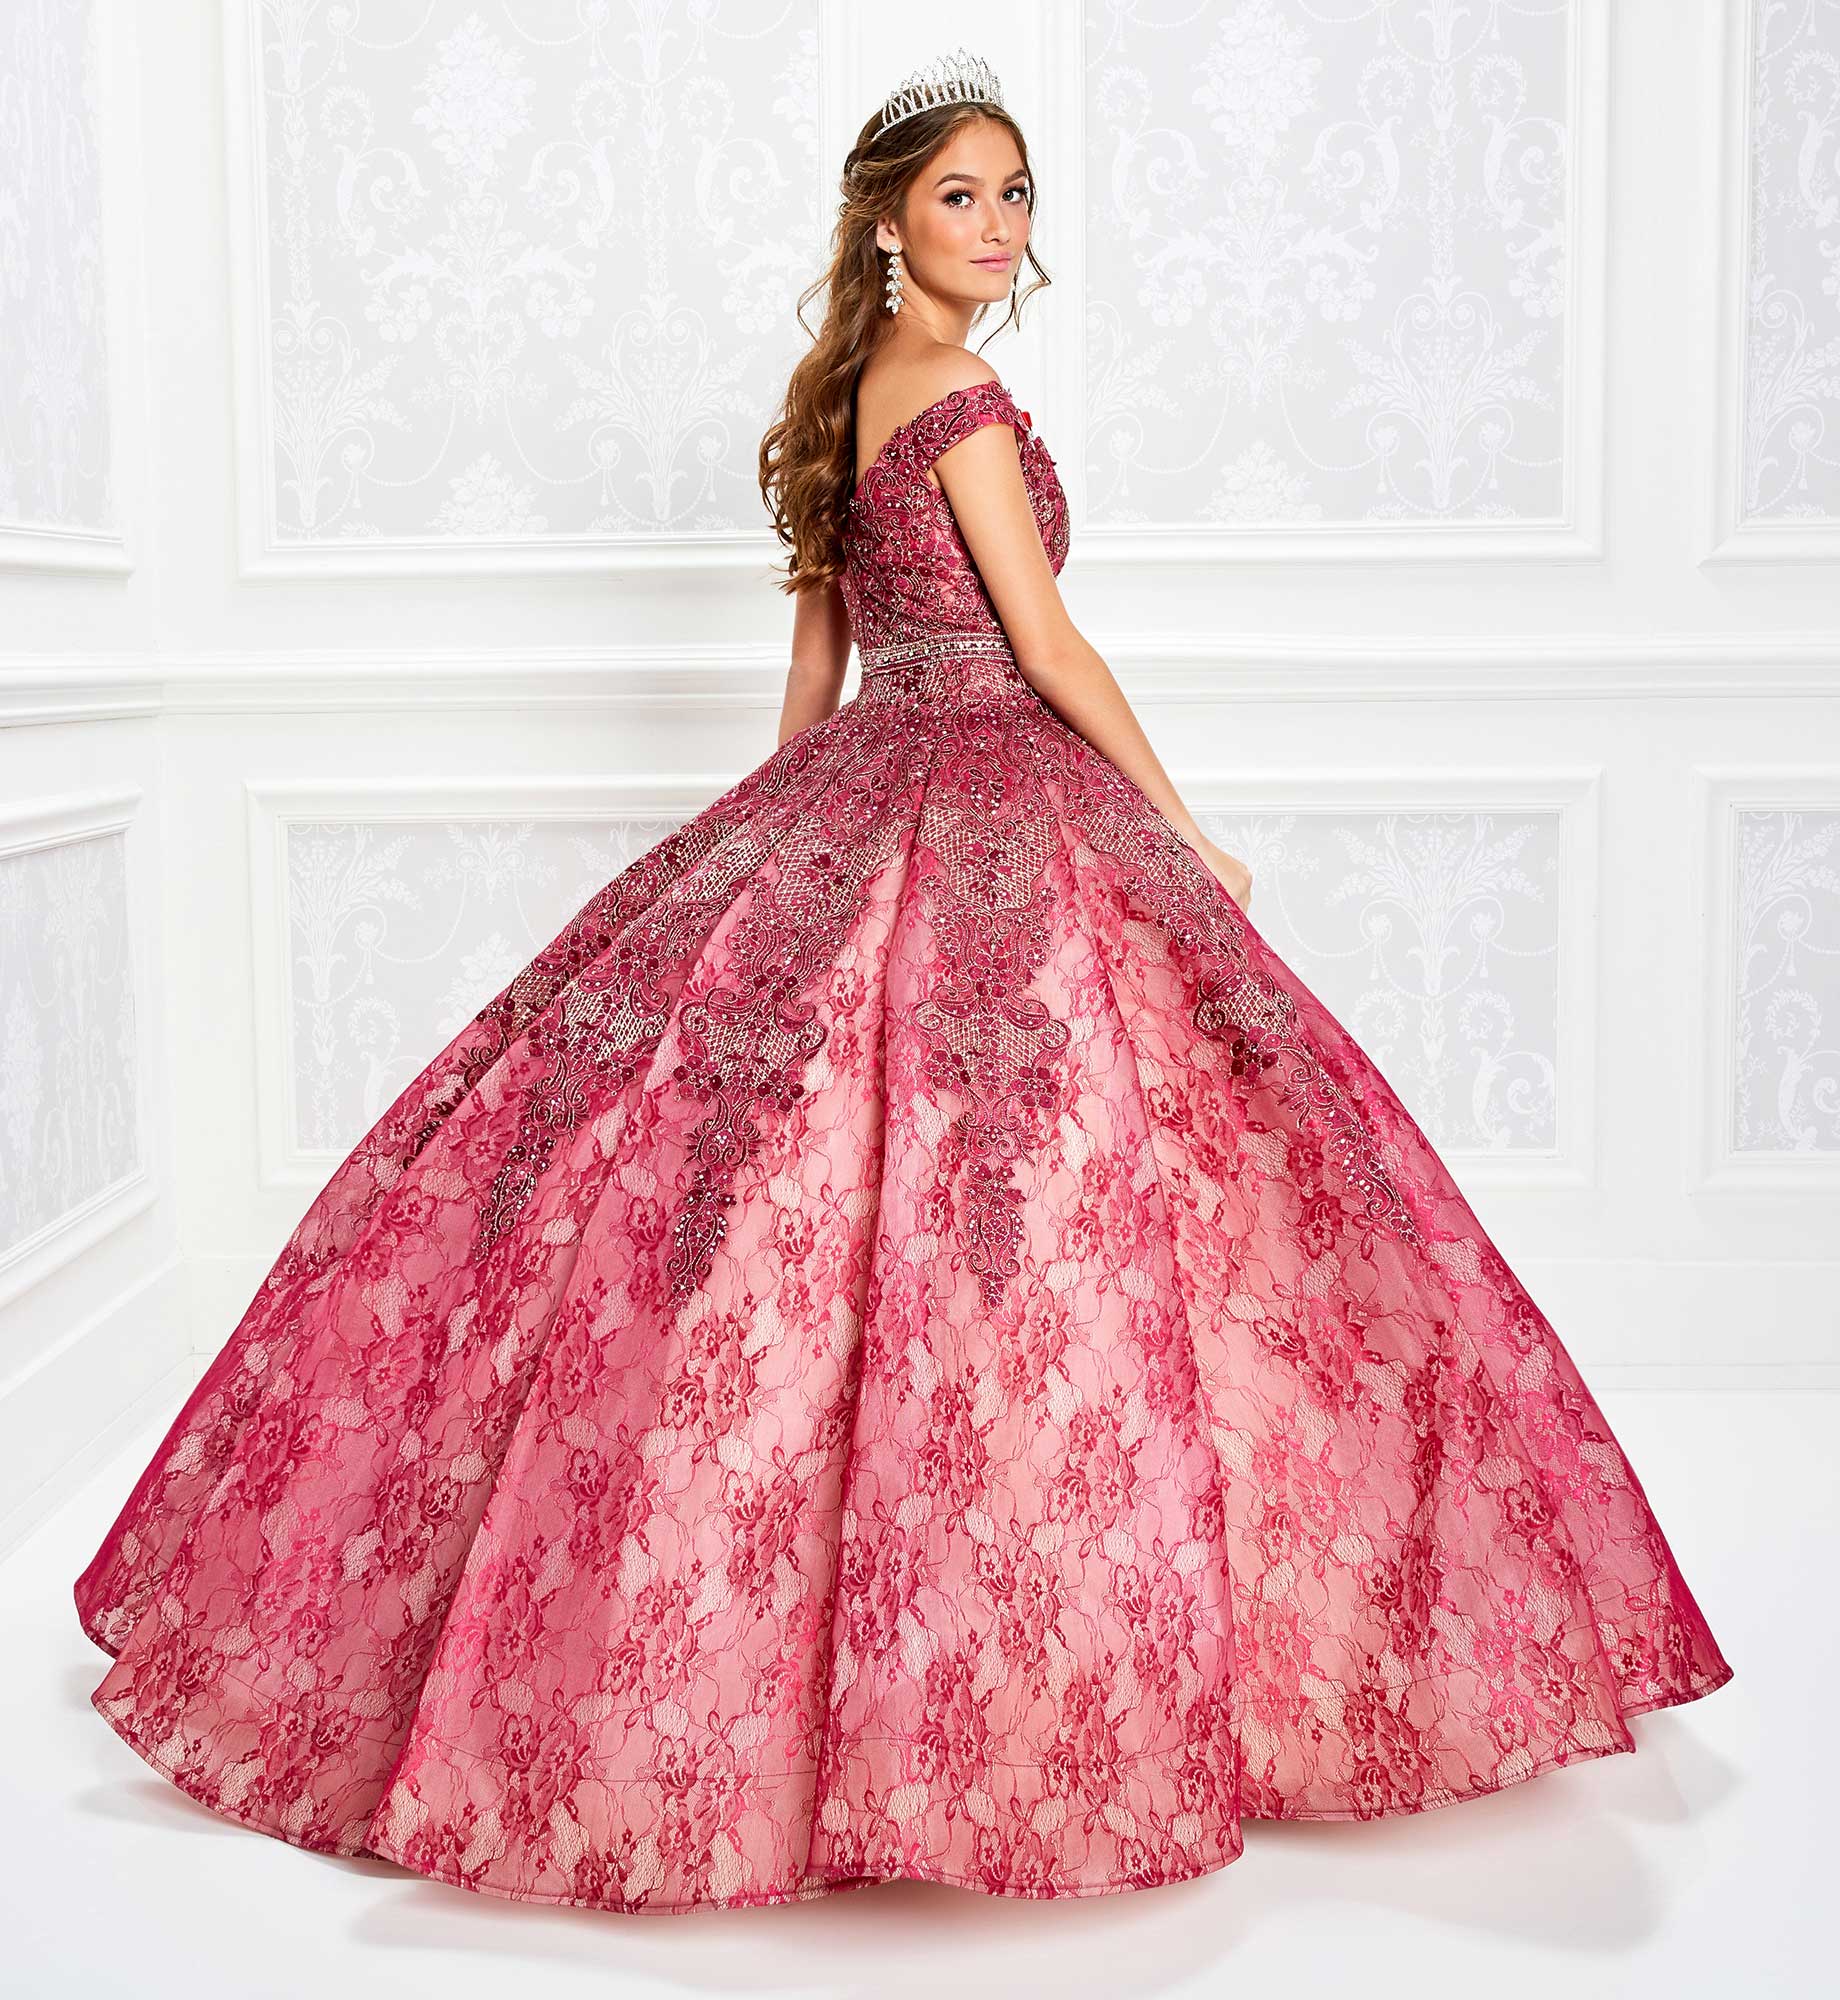 Striking quinceanera dress with off the shoulder bodice and beaded lace